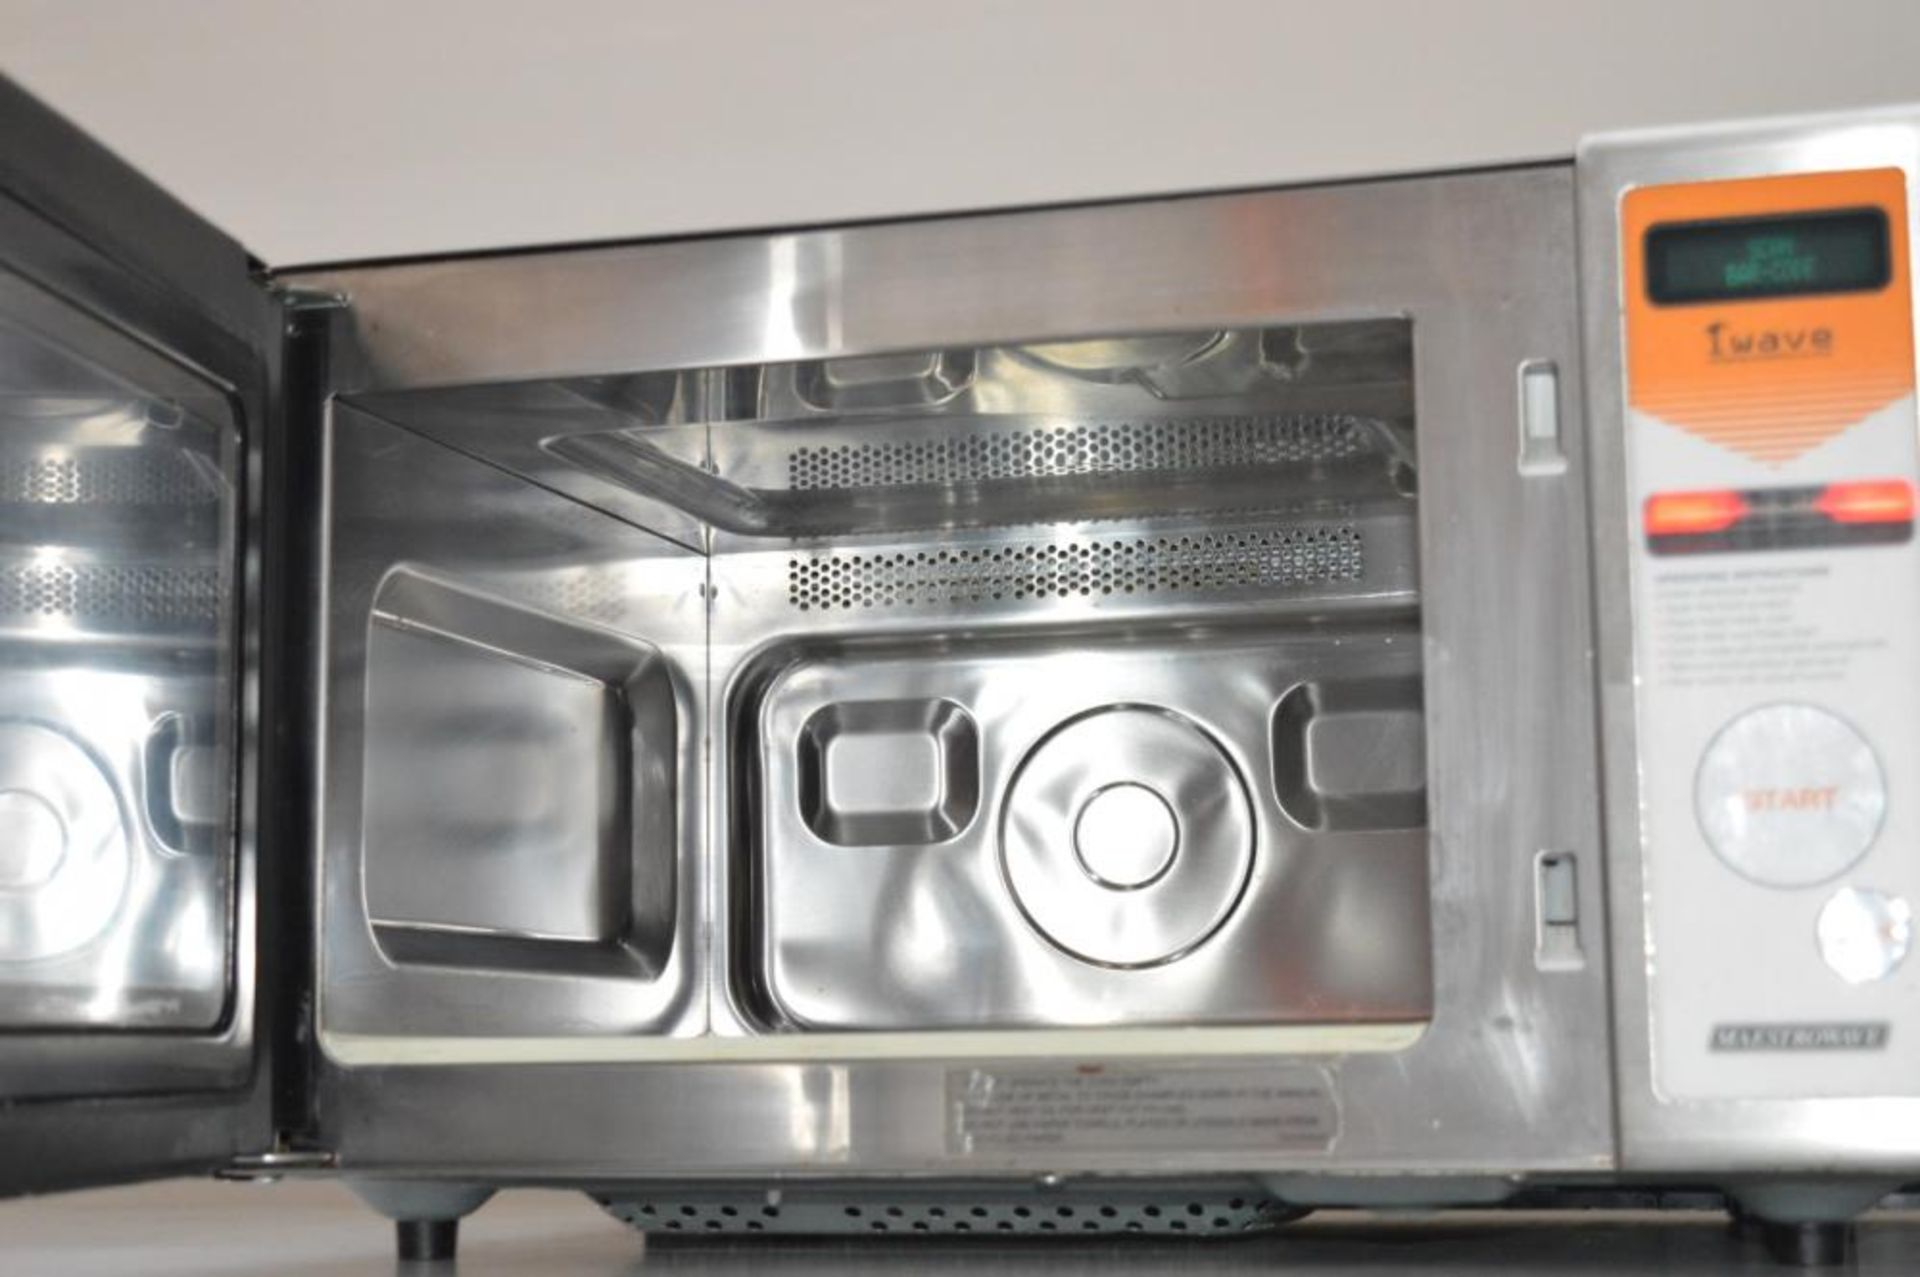 1 x iWave MiWAVE1000 Automated Foodservice Solution - Stainless Steel 1000w Catering Microwave - Image 10 of 14